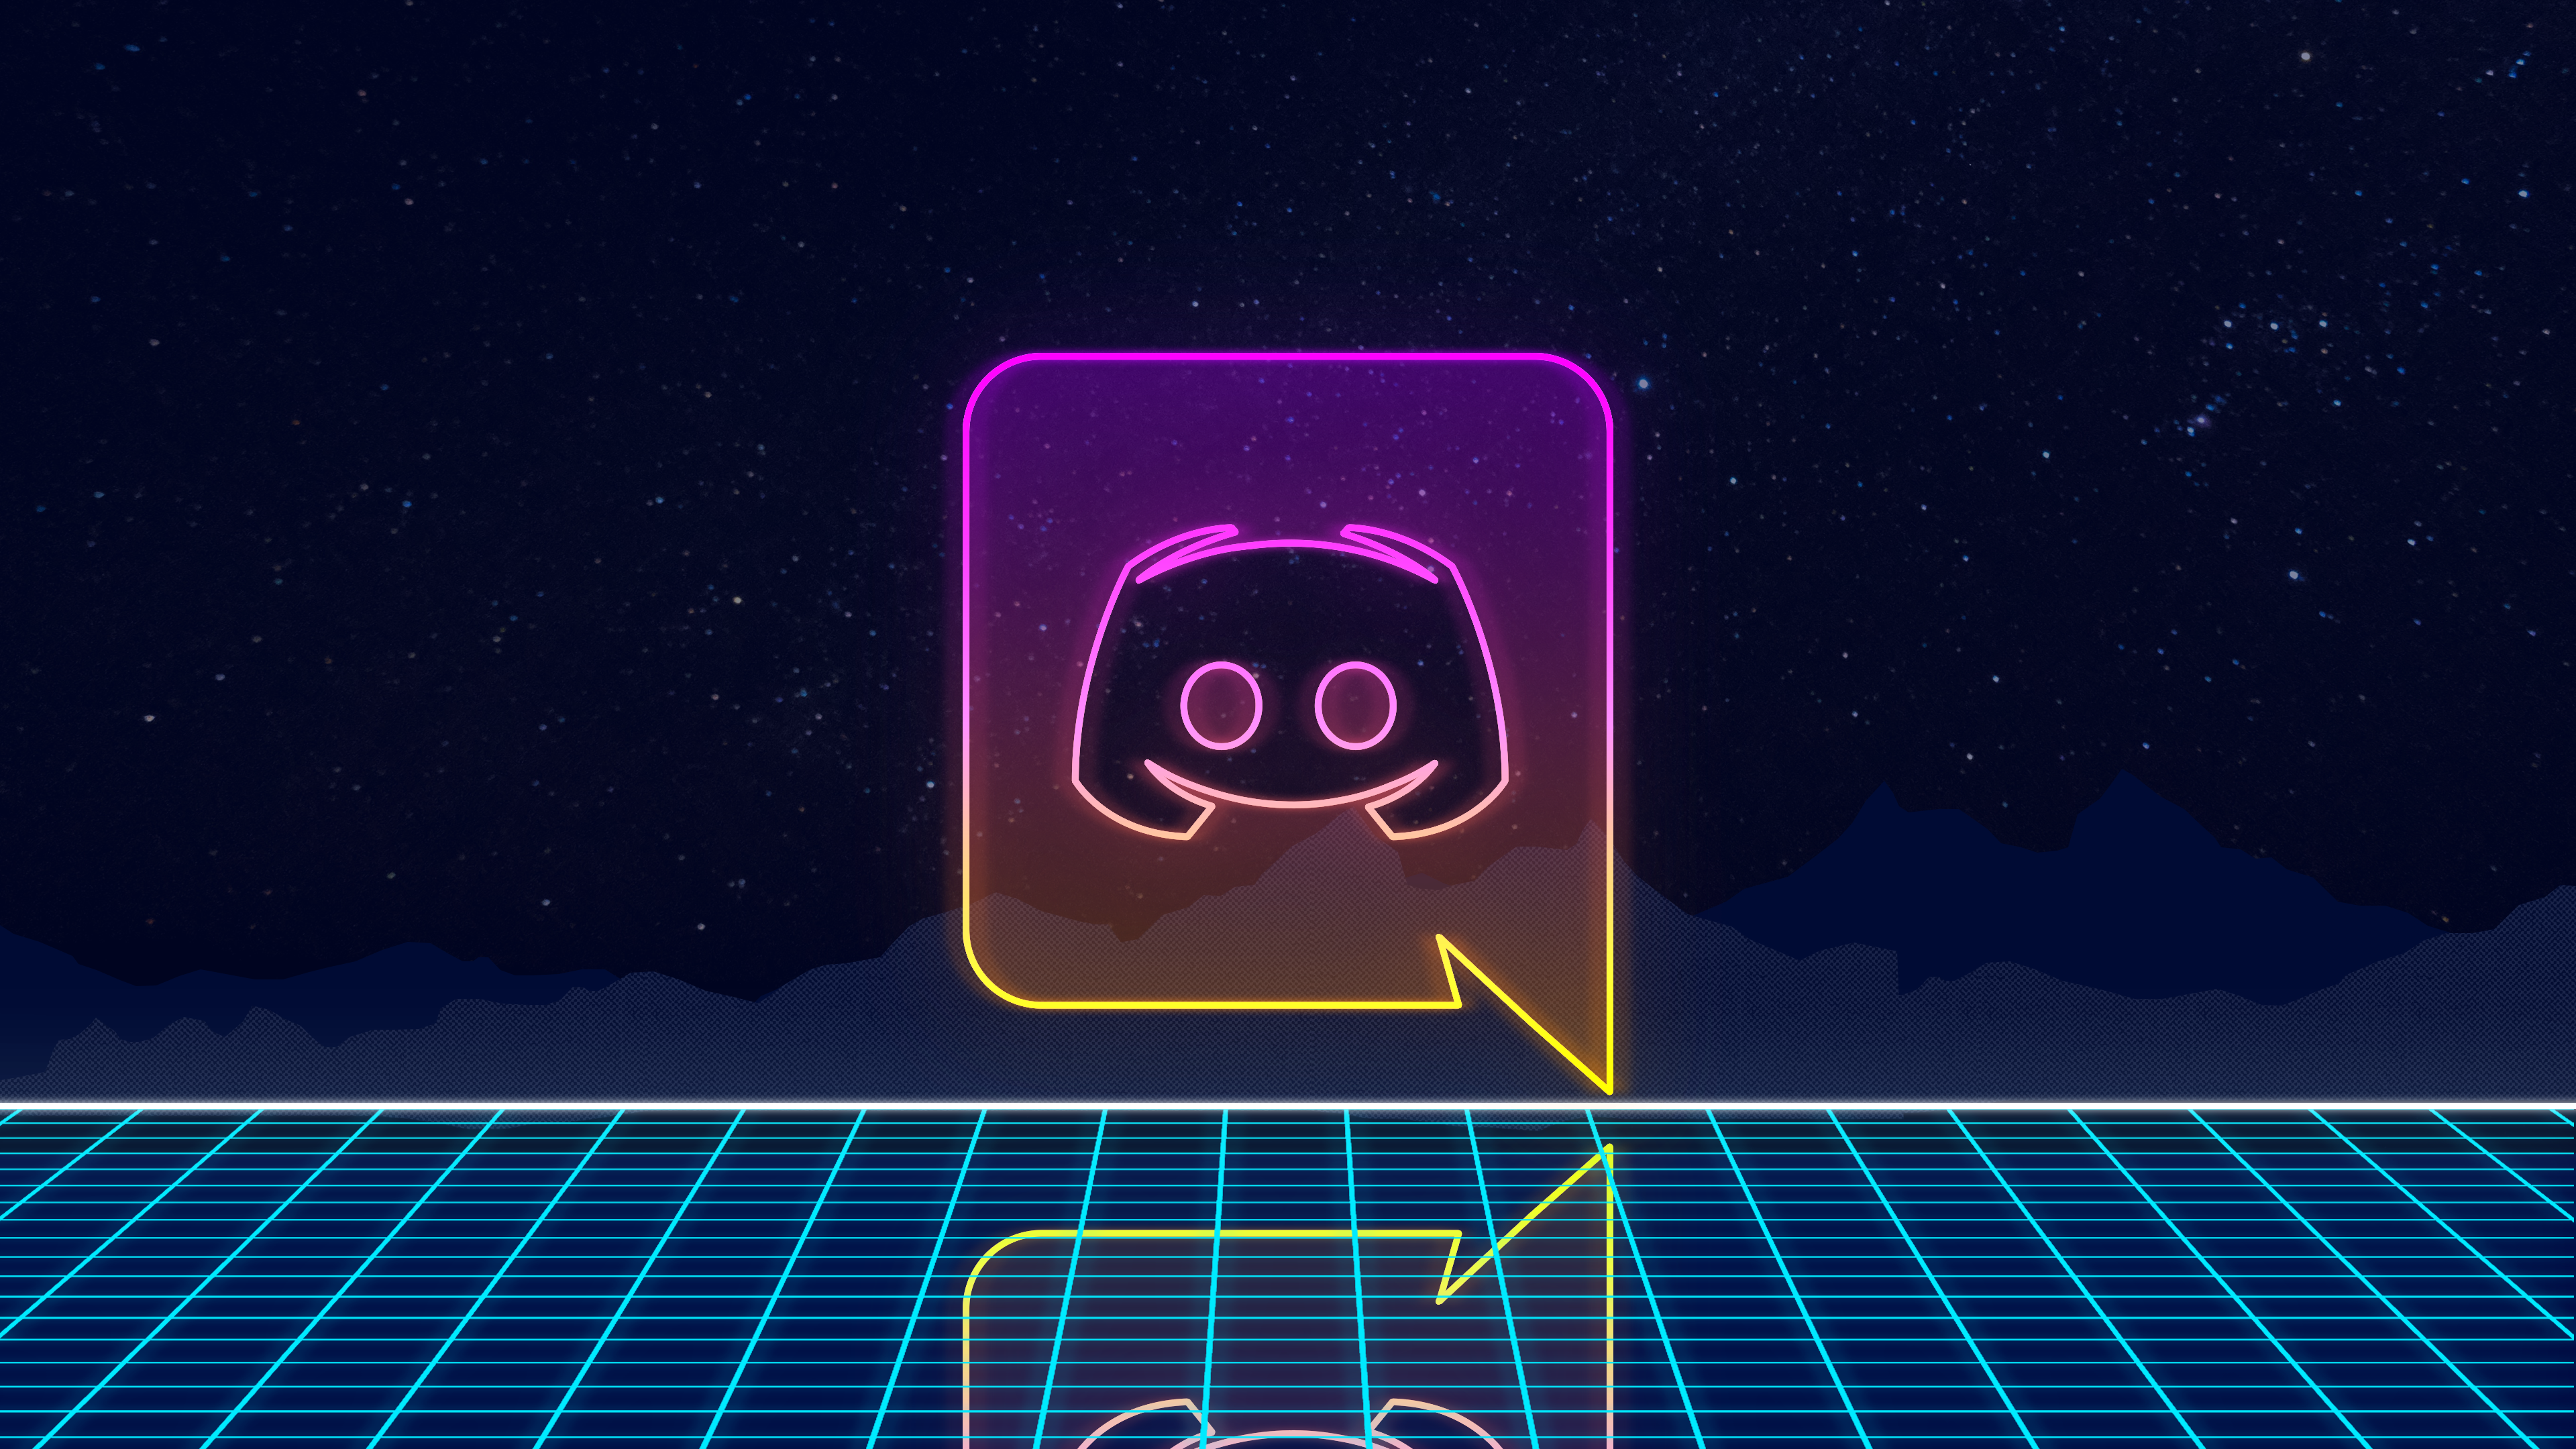 Cool Discord Wallpapers